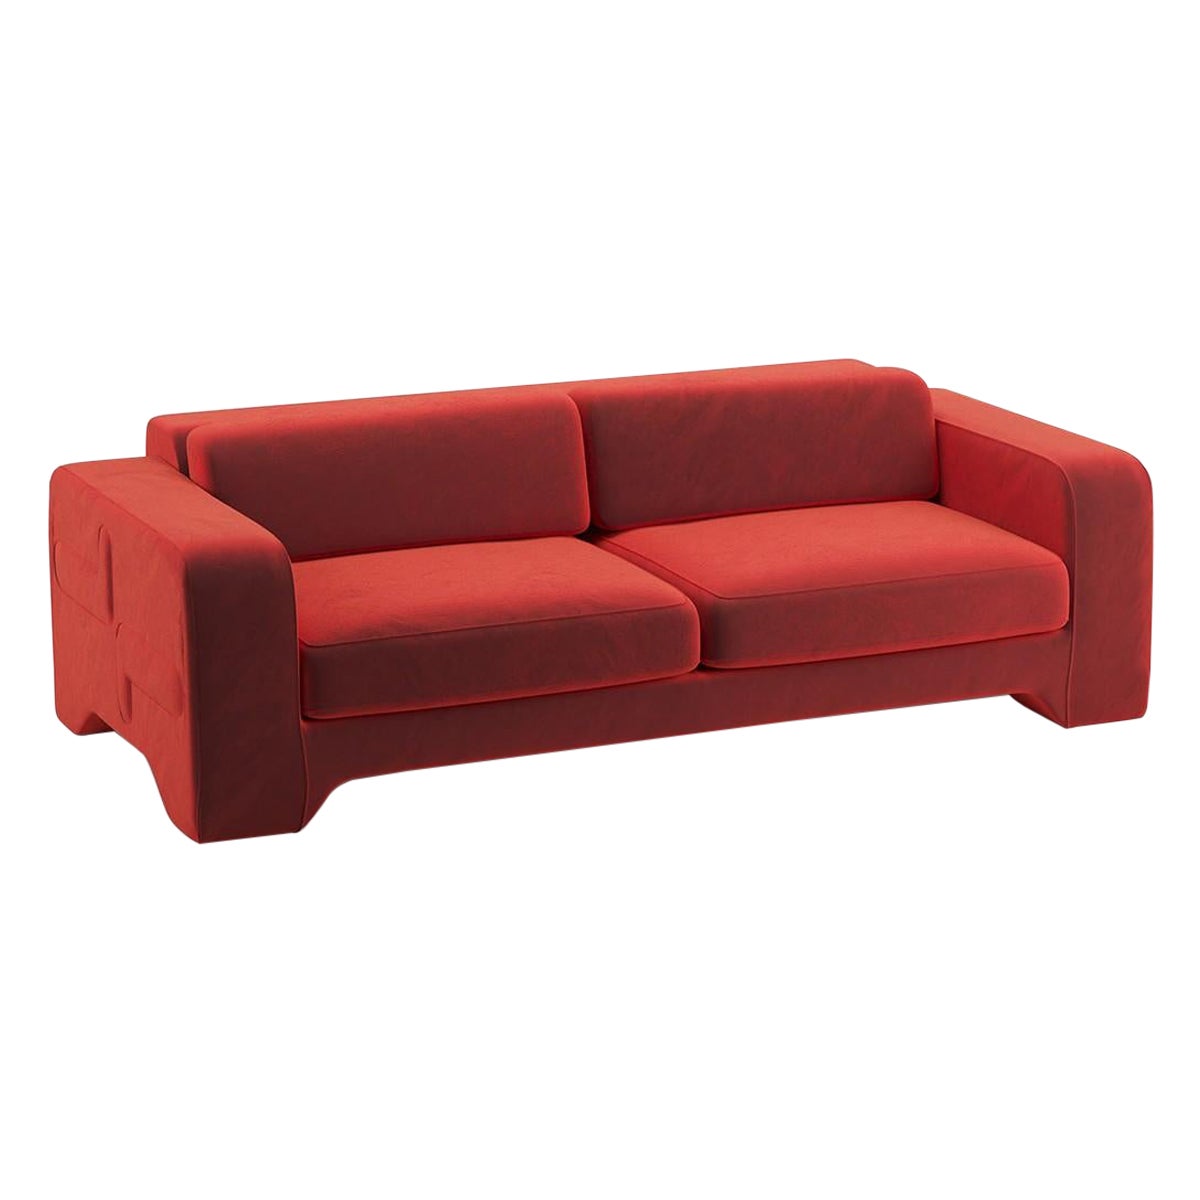 Popus Editions Giovanna 2.5 Seater Sofa in Vermilion Como Velvet Upholstery For Sale